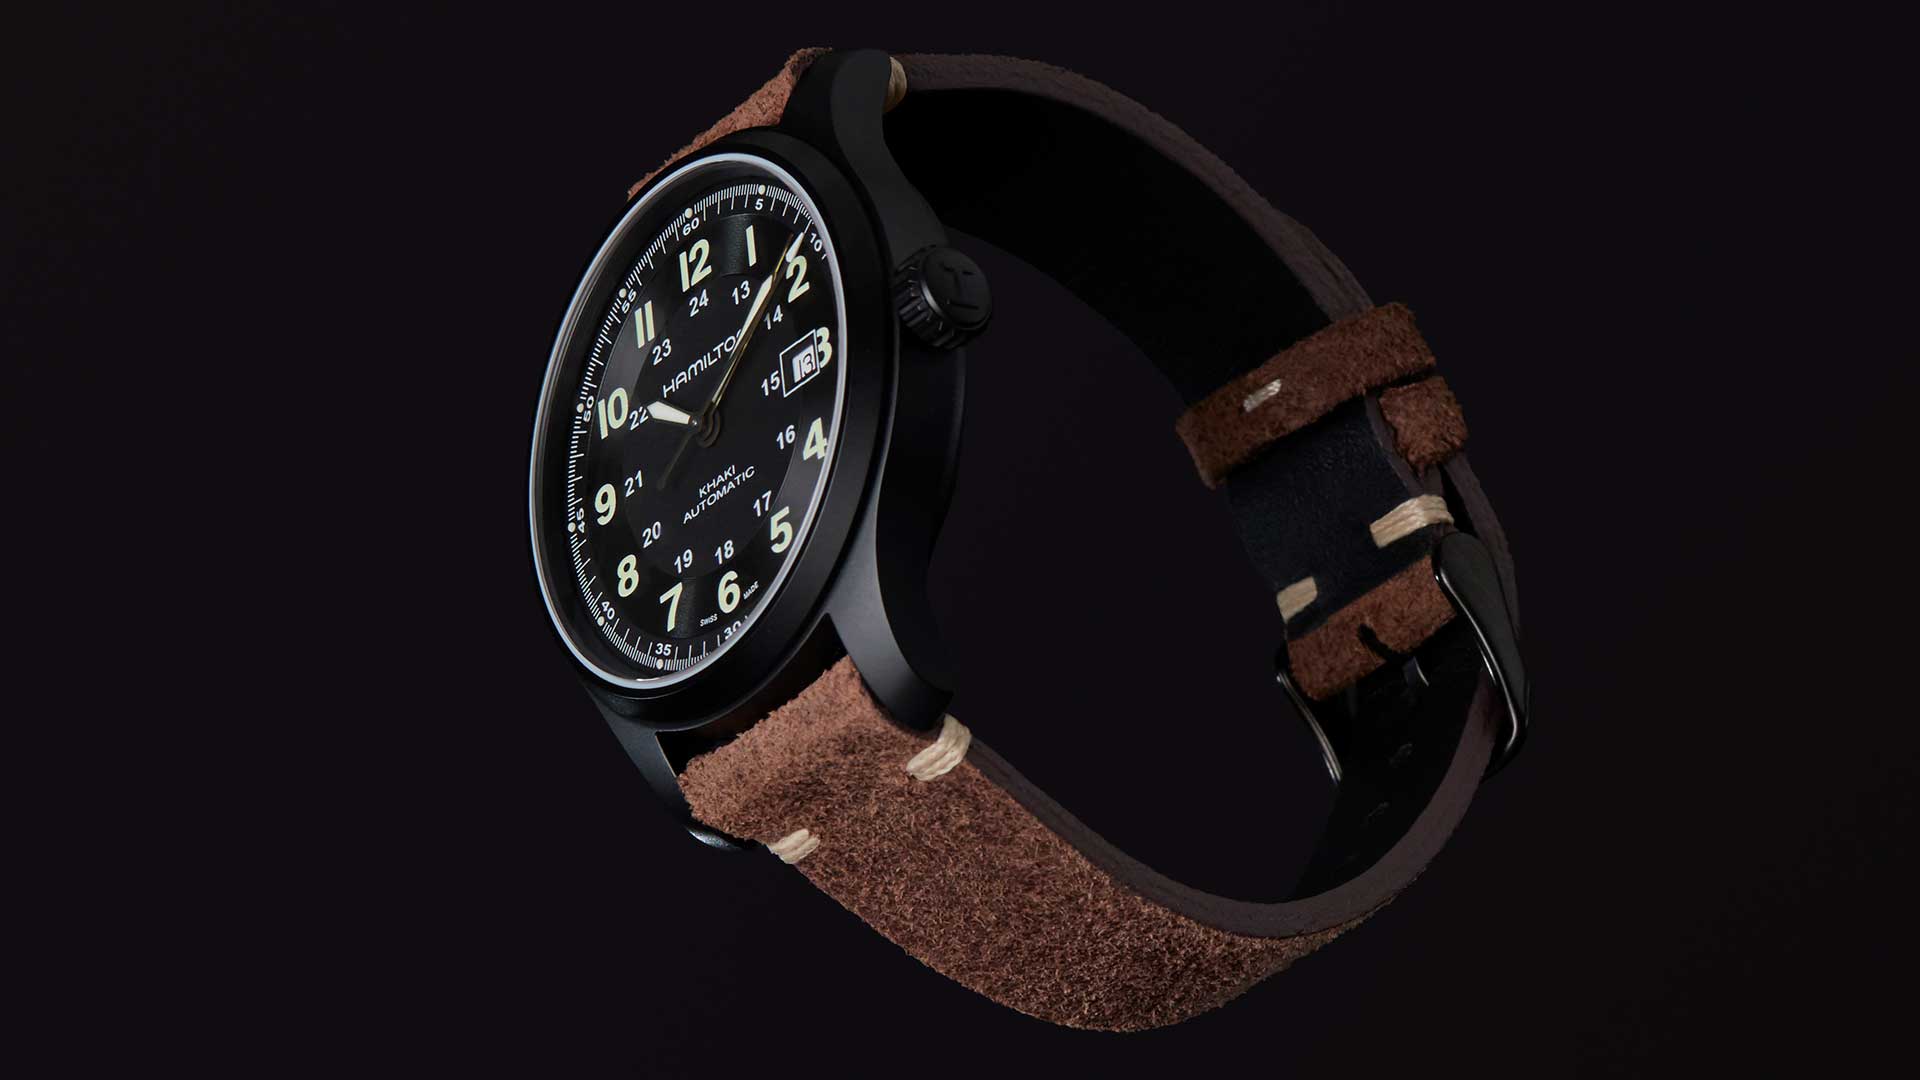 Watch and leather straps shot on location by Dallas Fort Worth Waco Texas jewelry and watch product photographer Kate Benson.